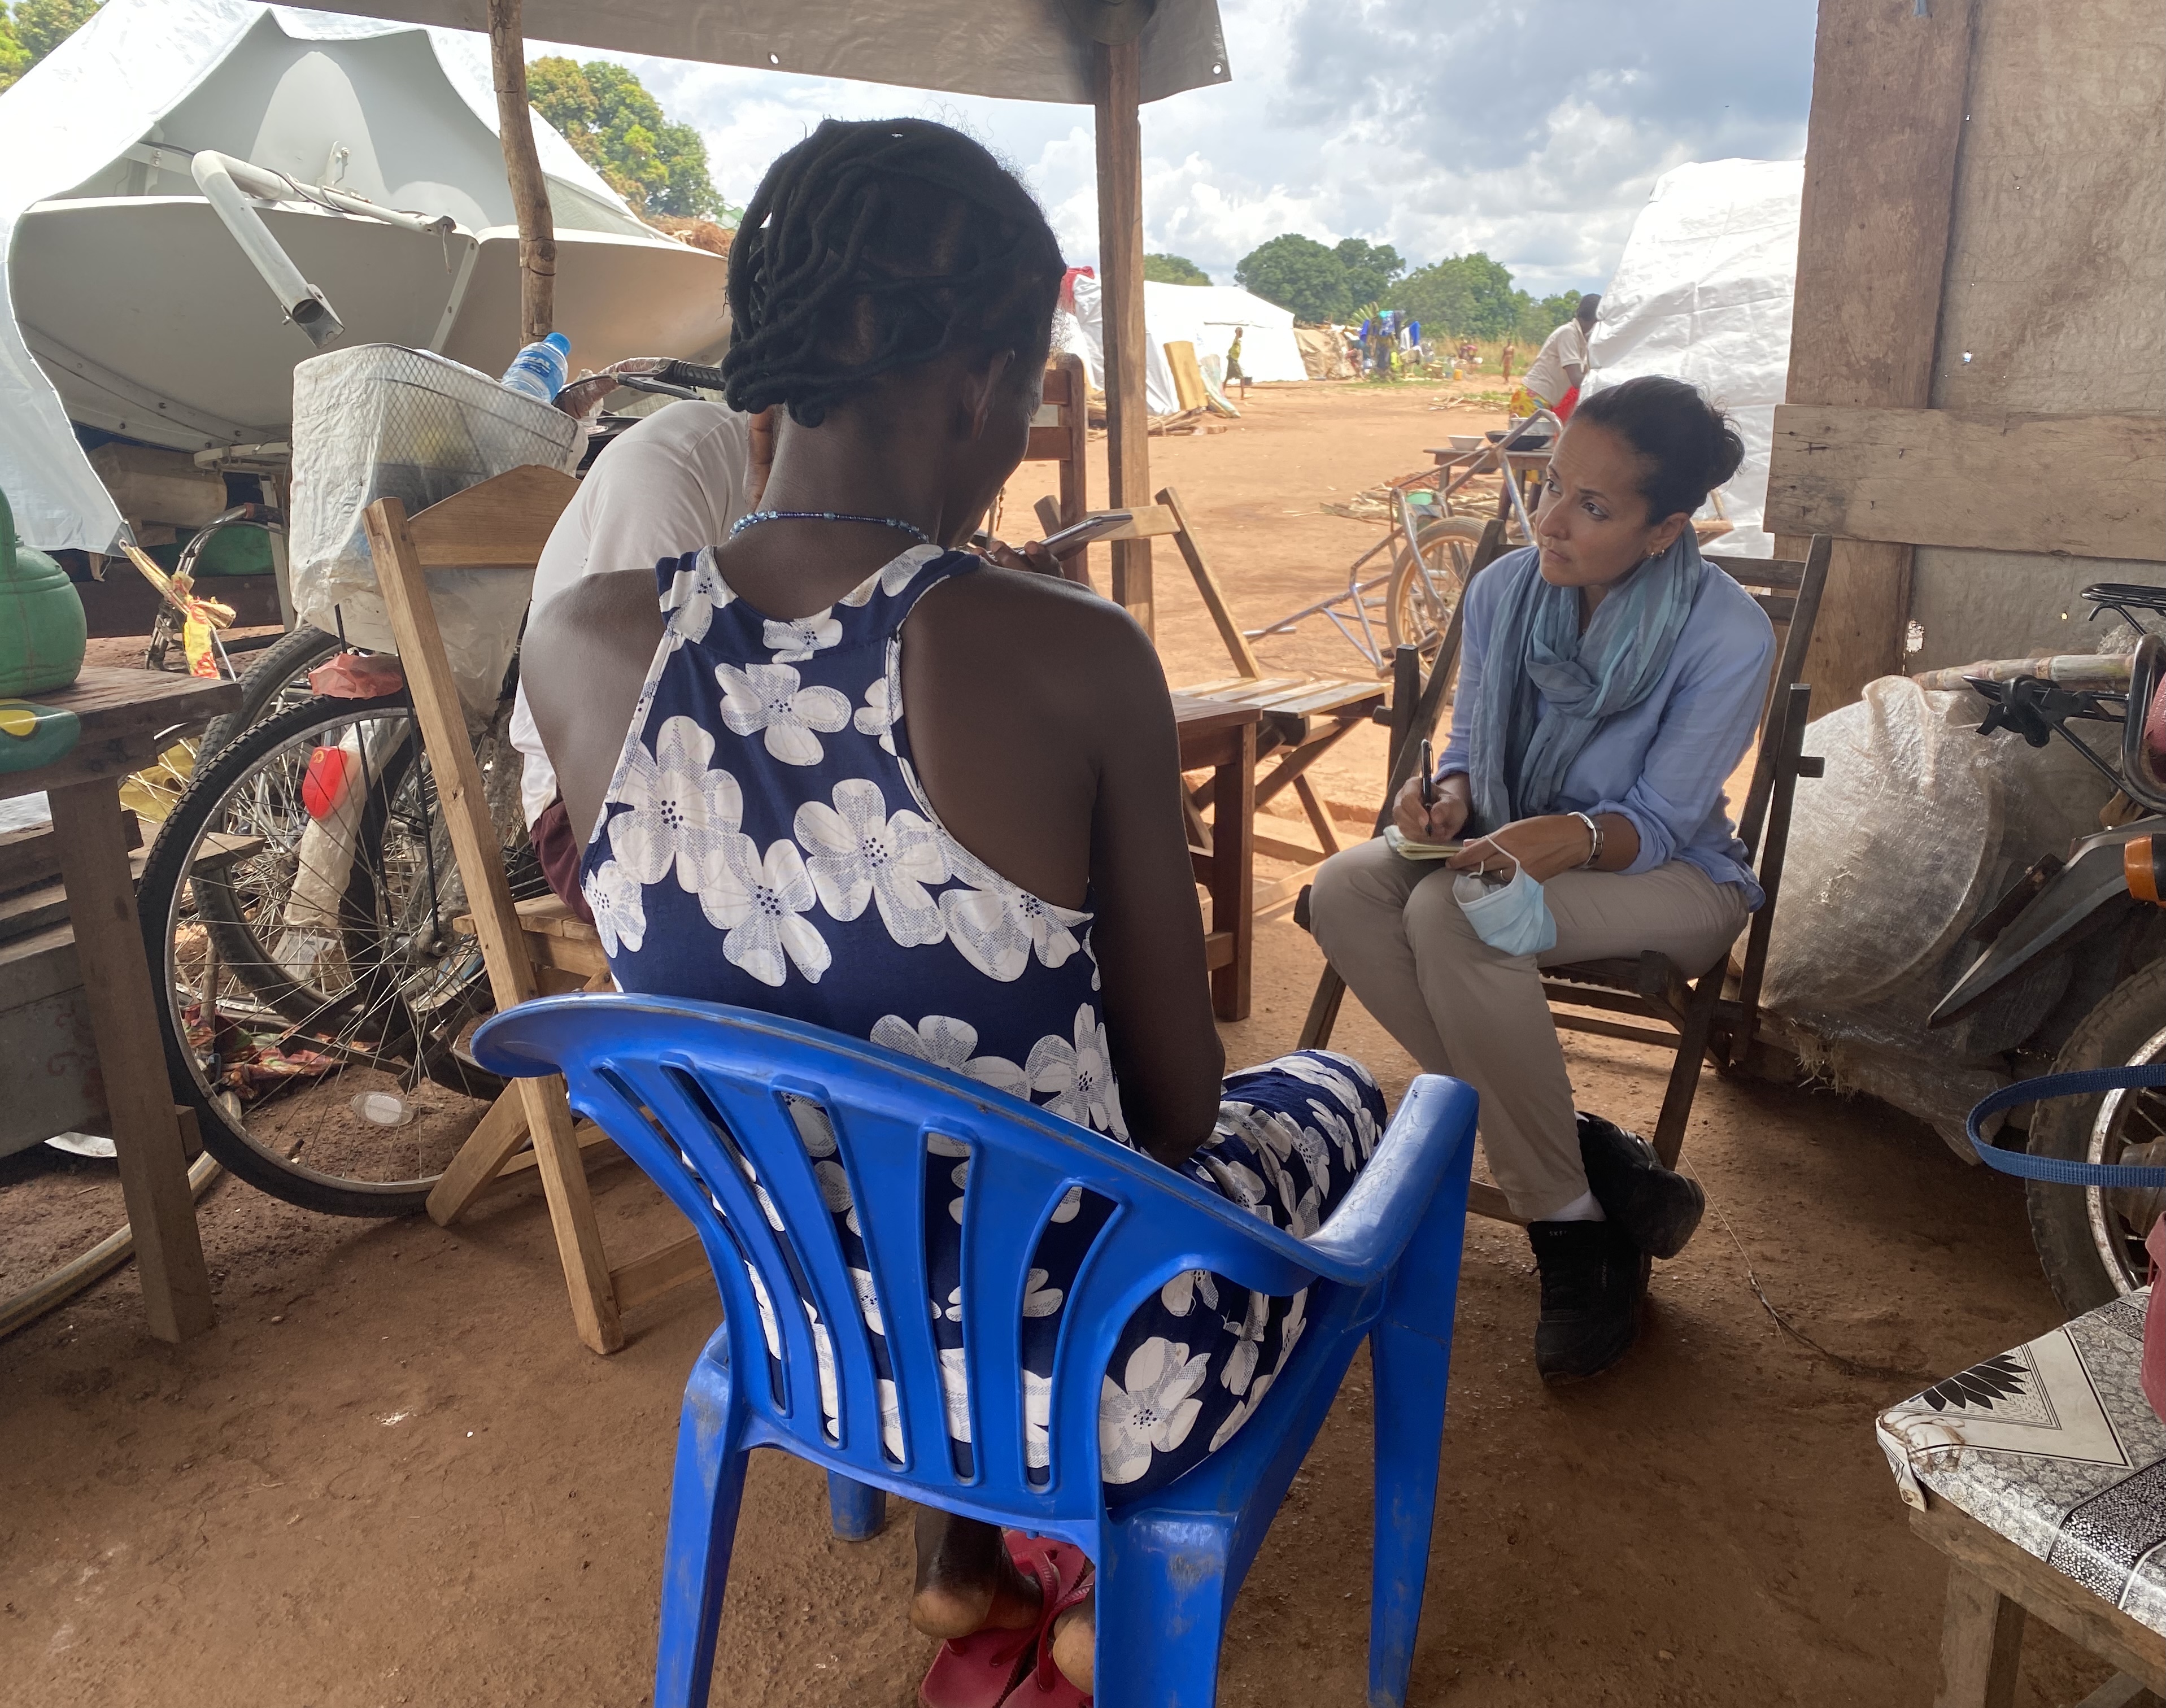 Rawya Rageh in a camp for displaced persons in Tambura, Western Equatoria State, South Sudan, 2021, interviewing a survivor who had fled fighting in her village.